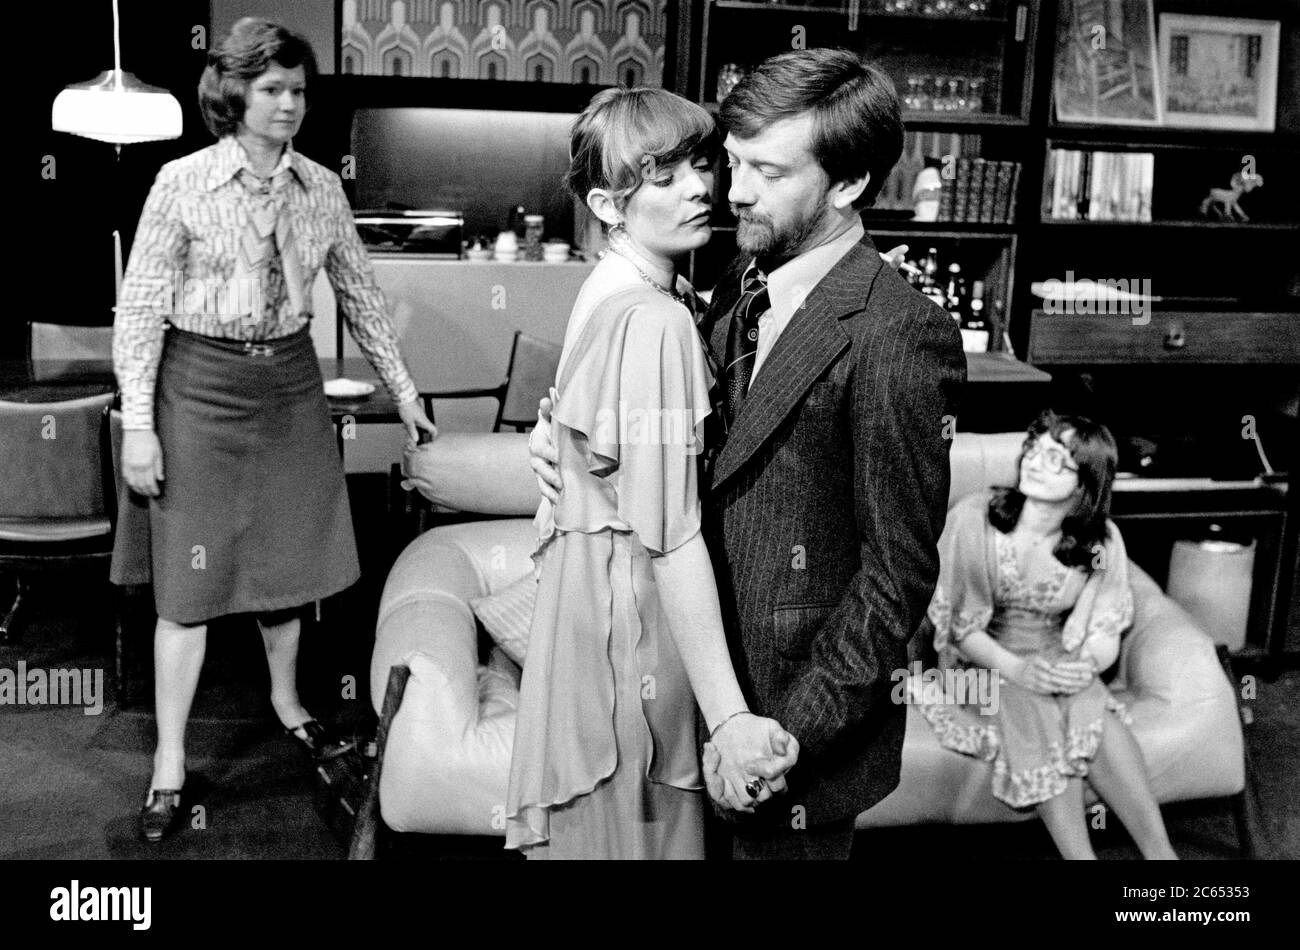 l-r: Thelma Whiteley (susan), Alison Steadman (Beverly), John Salthouse (Tony), Janine Duvitski (Angela) in ABIGAIL'S PARTY devised & directed by Mike Leigh at the Hampstead Theatre, London NW3  18/04/1977  set design: Tanya McCallin  costumes: Lindy Hemming  lighting: Alan O'Toole Stock Photo